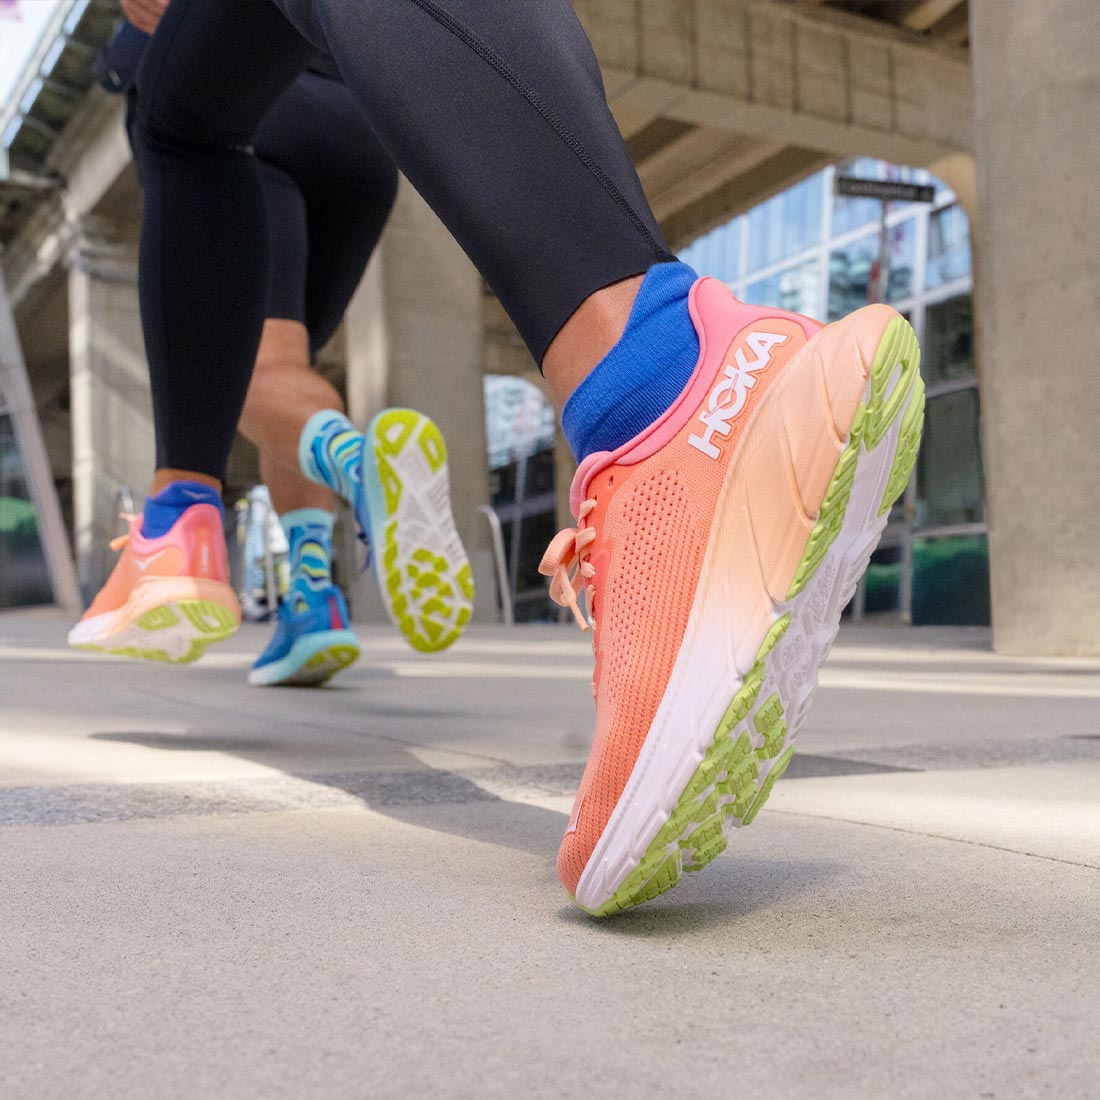 Lifestyle image: Two people running in women's and men's HOKA Arahi 7 running shoes on a city sidewalk.